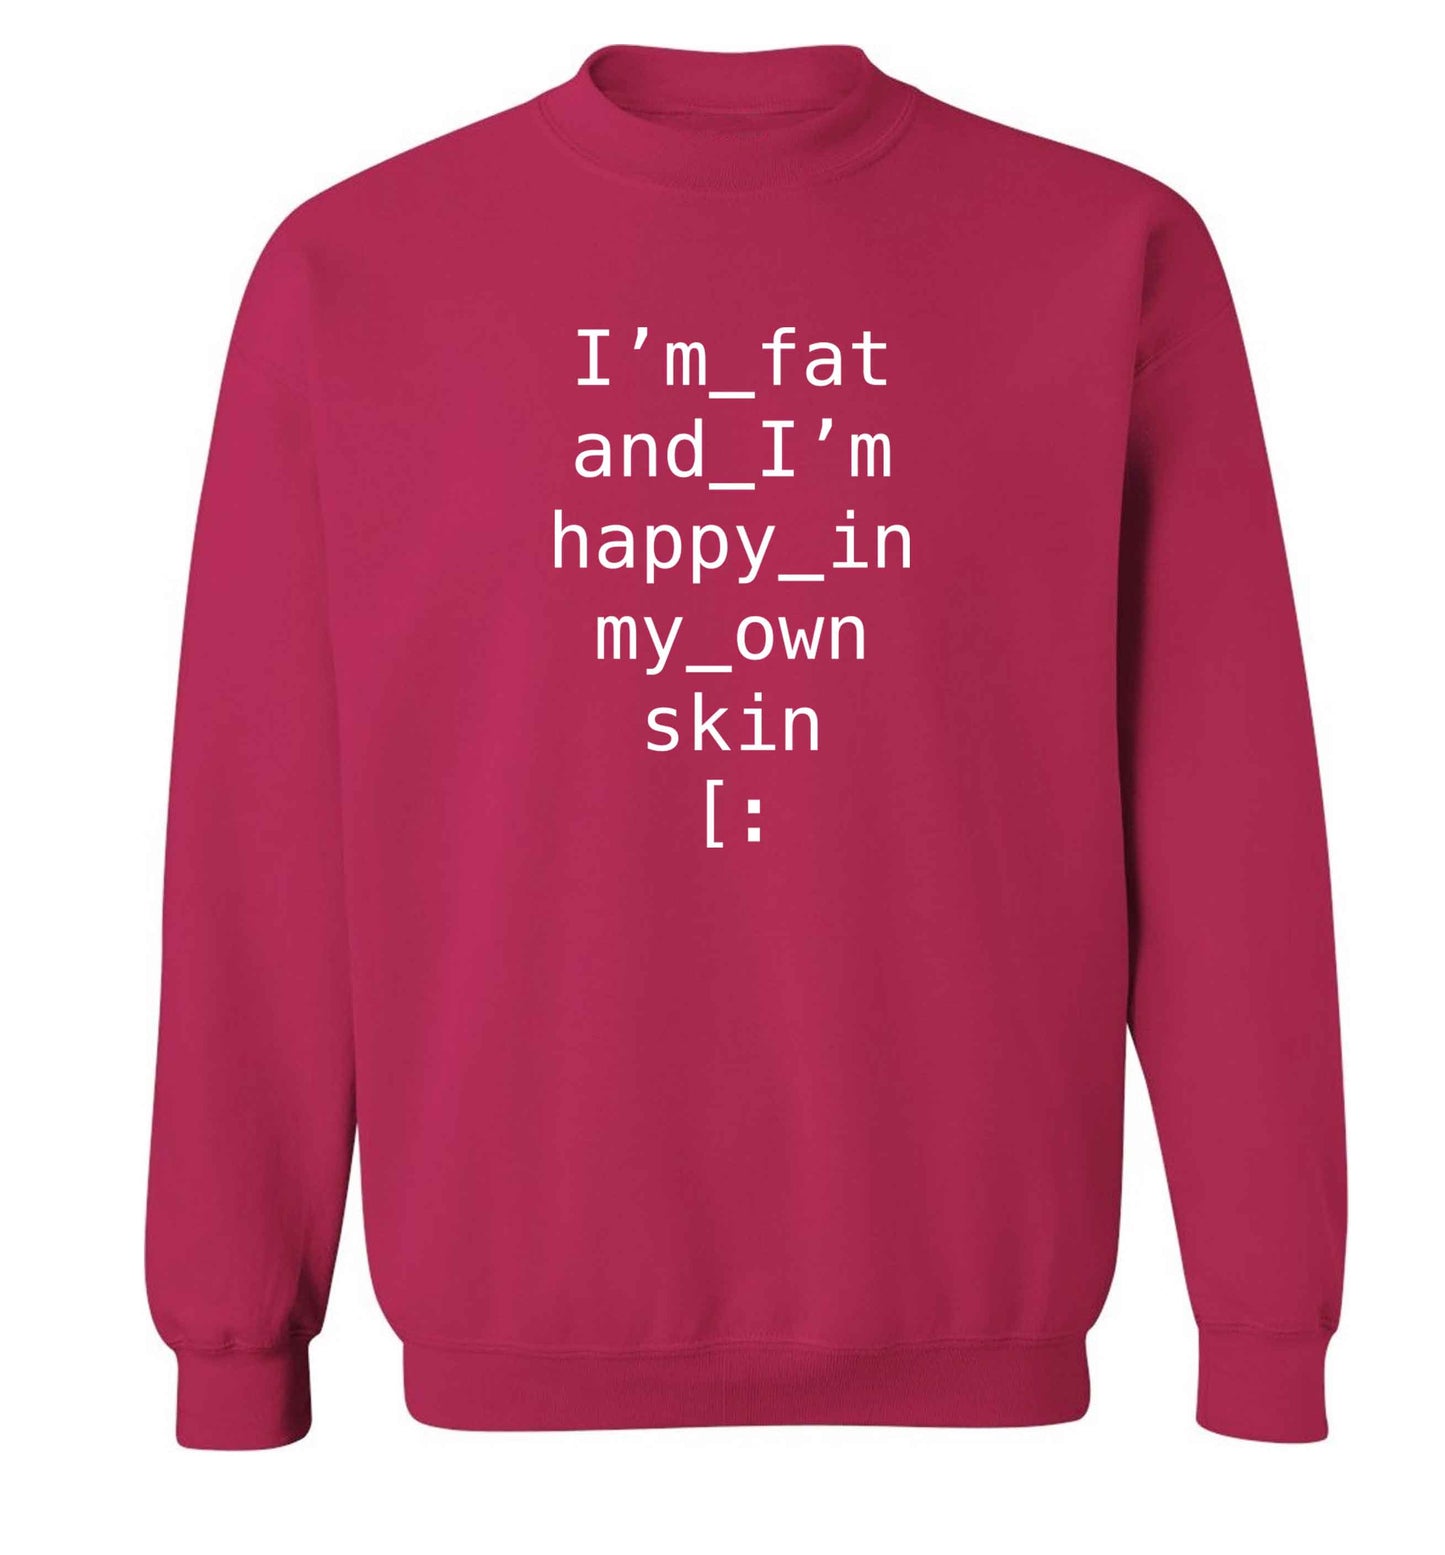 I'm fat and happy in my own skin adult's unisex pink sweater 2XL